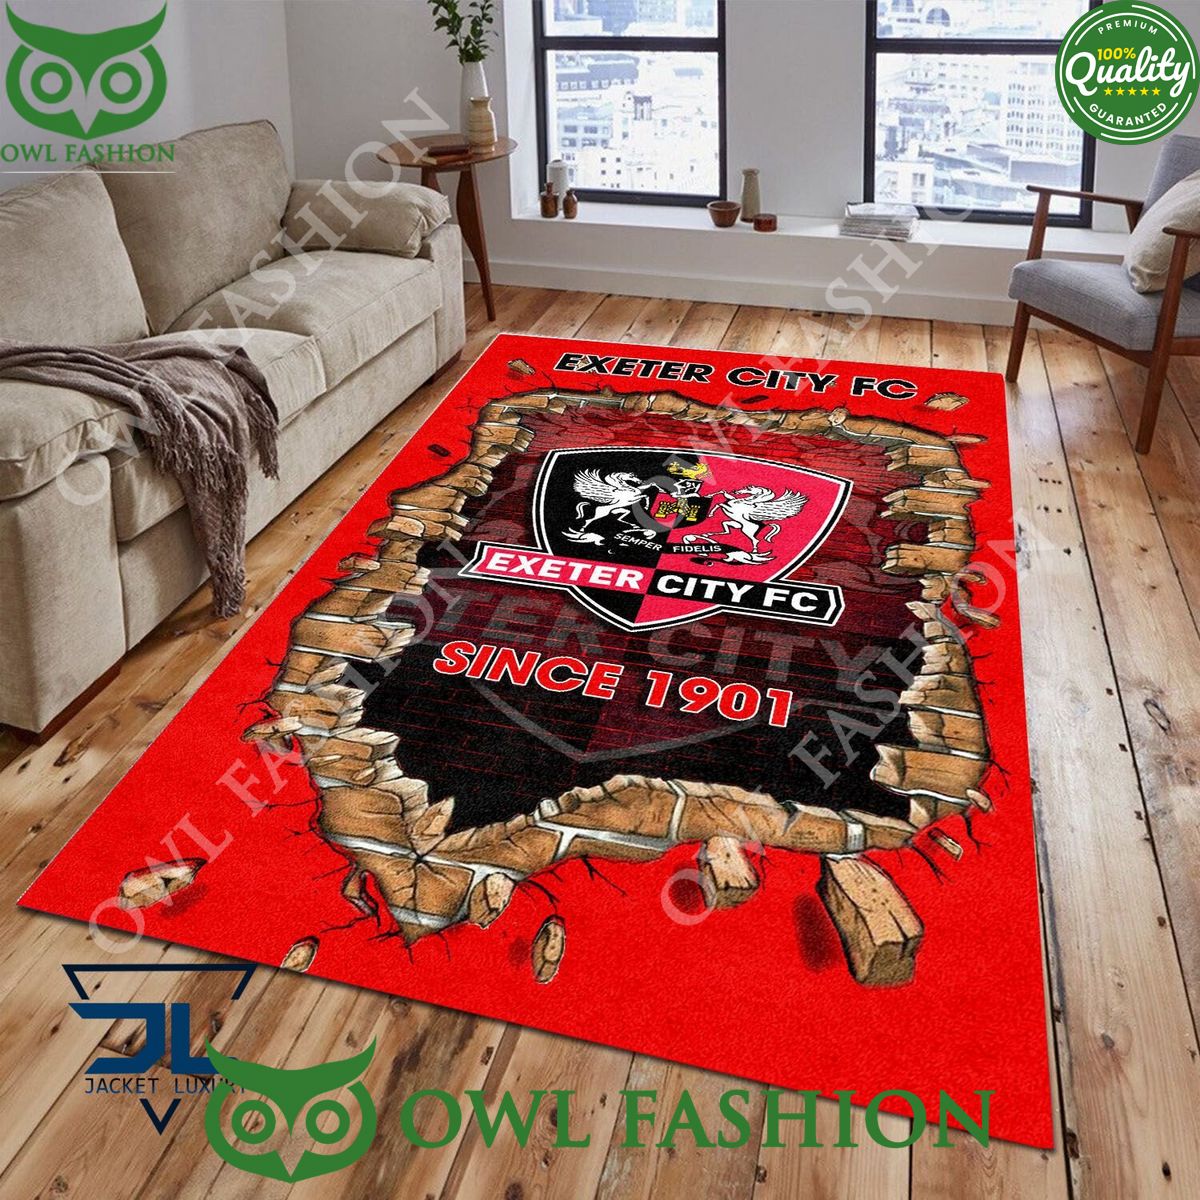 Football Exeter City 1828 EPL Living Room Rug Carpet Natural and awesome